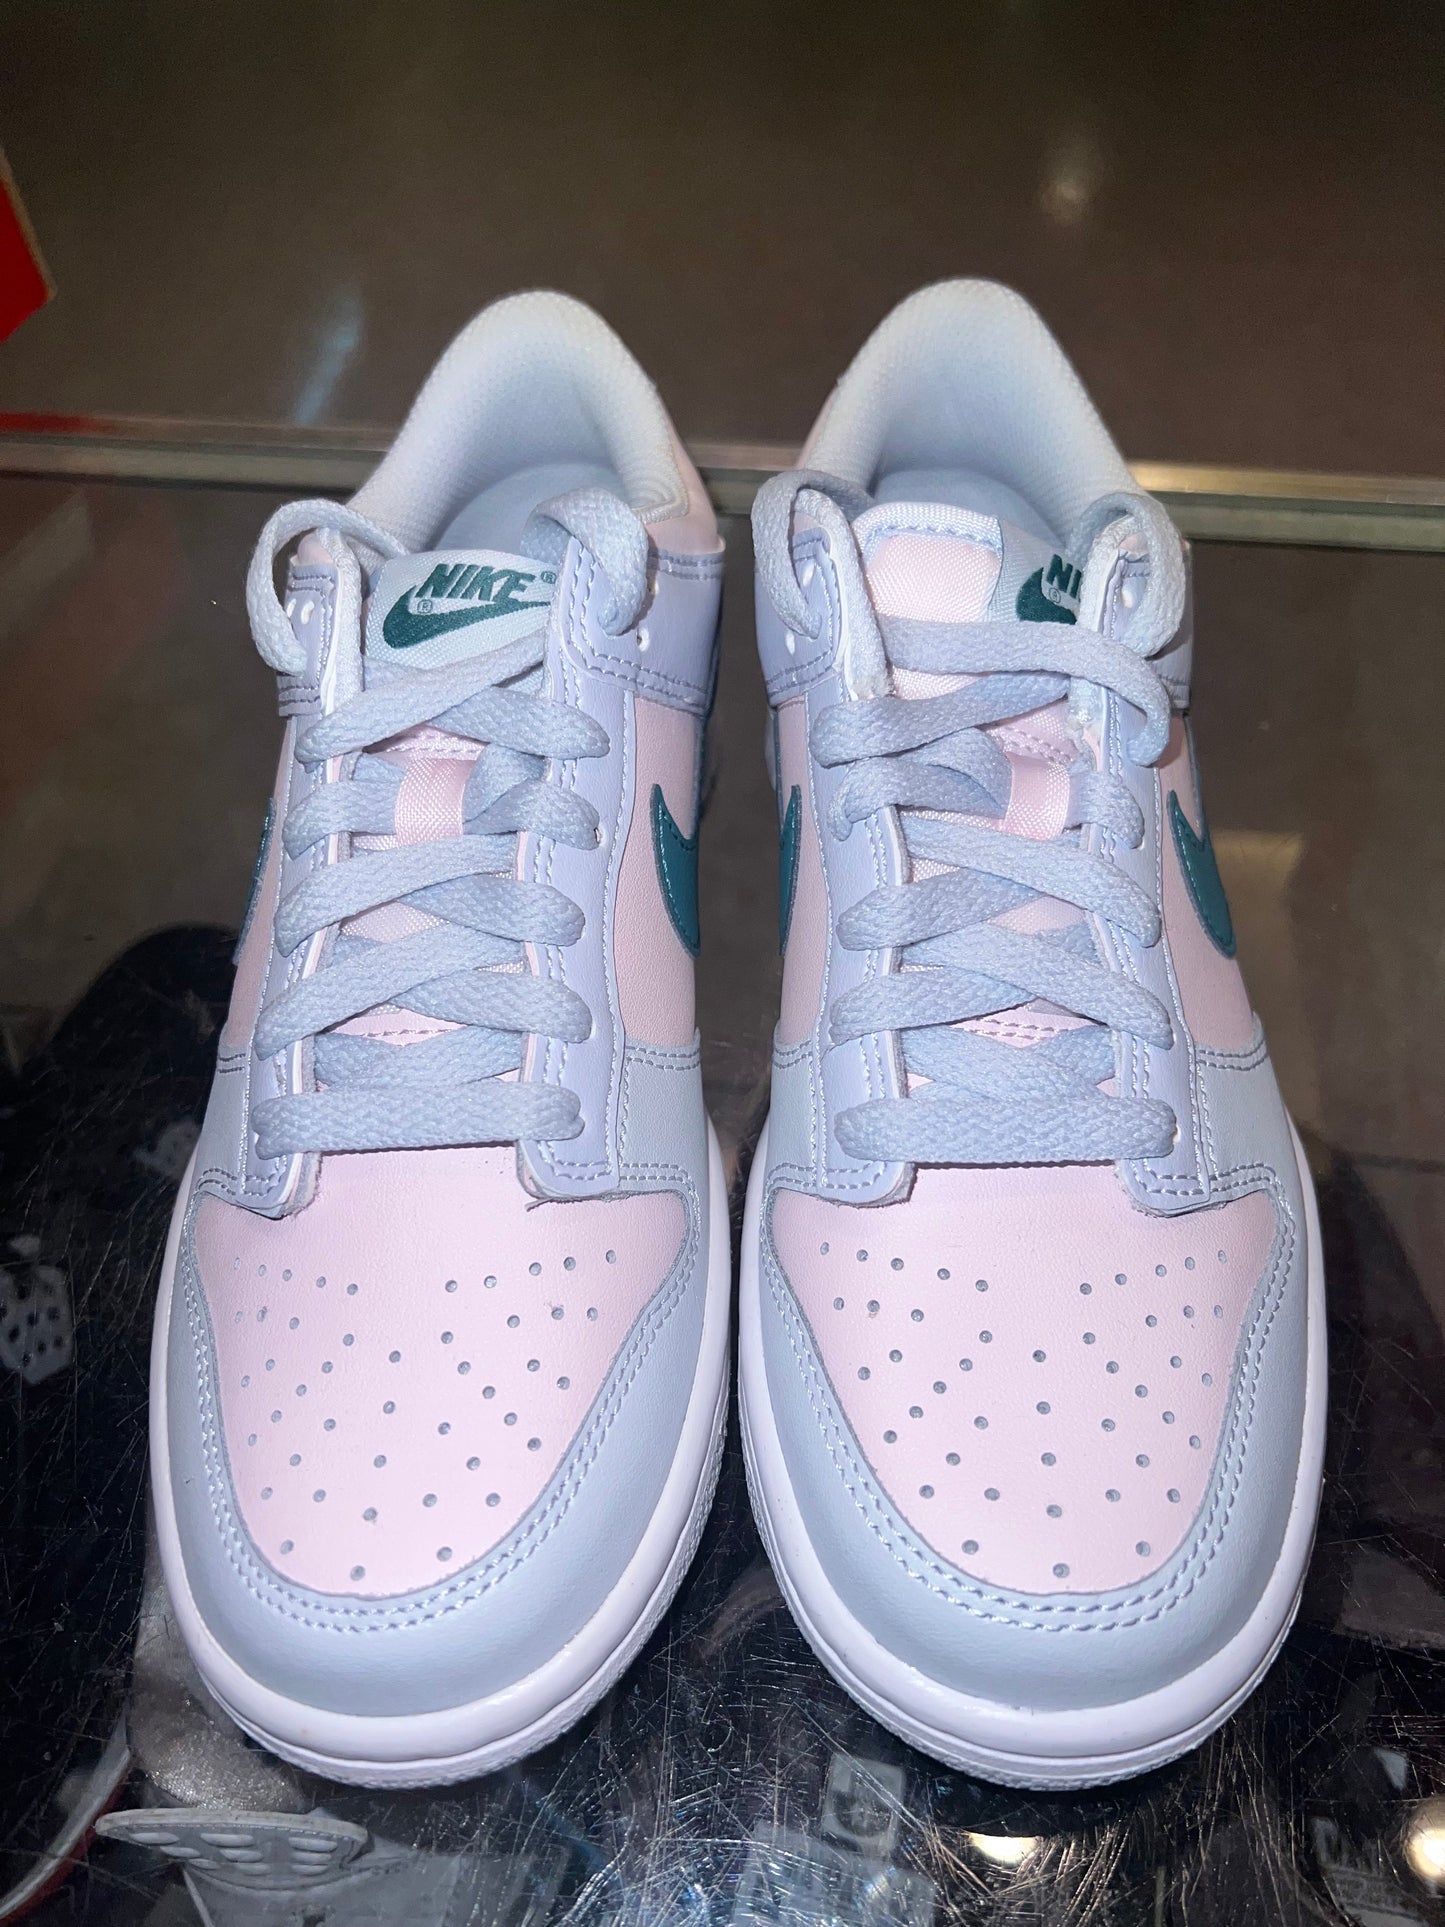 Size 6y Dunk Low “Mineral Teal” Brand New (Mall)